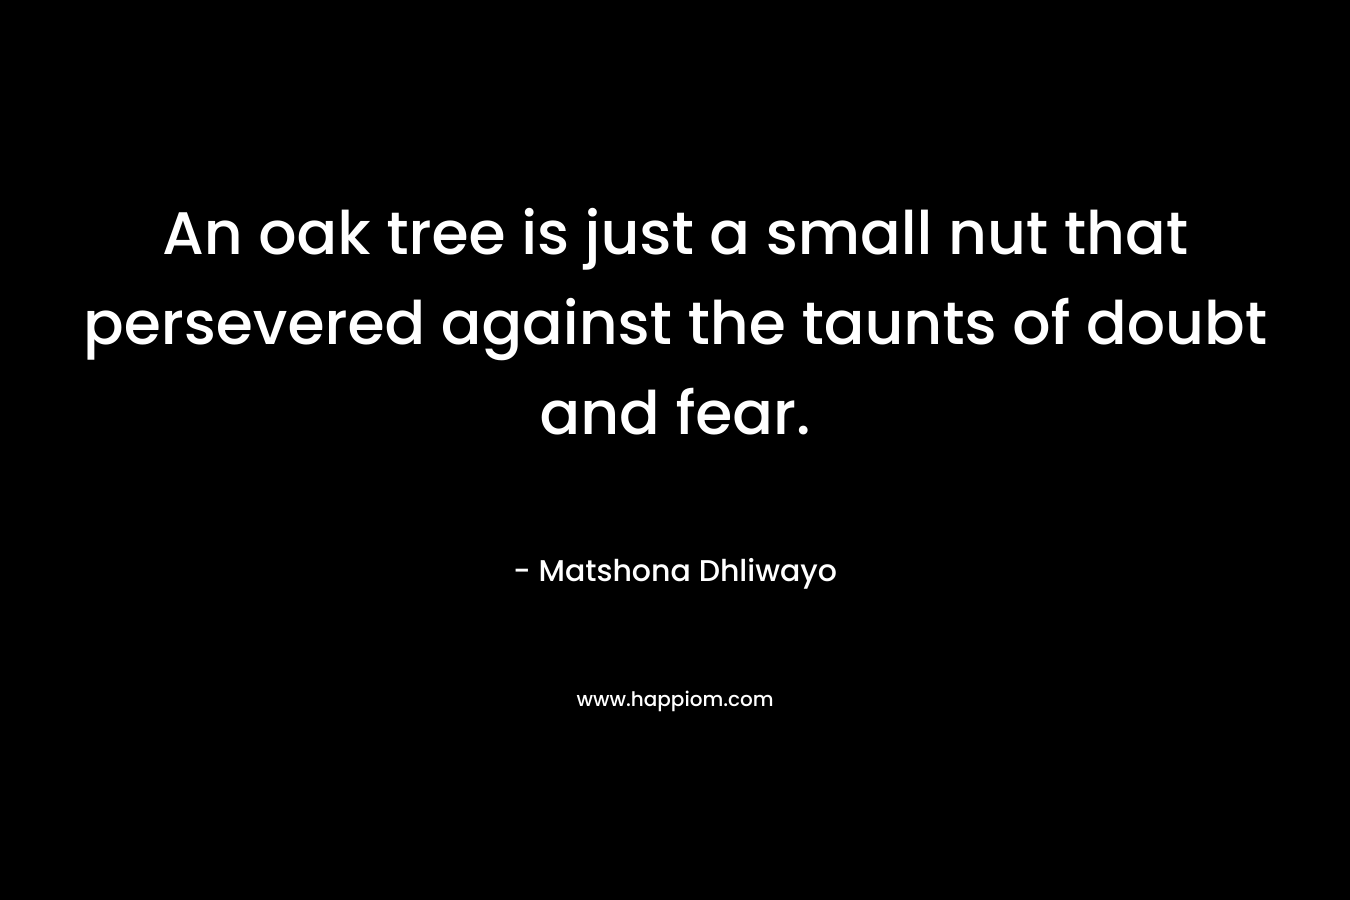 An oak tree is just a small nut that persevered against the taunts of doubt and fear. – Matshona Dhliwayo